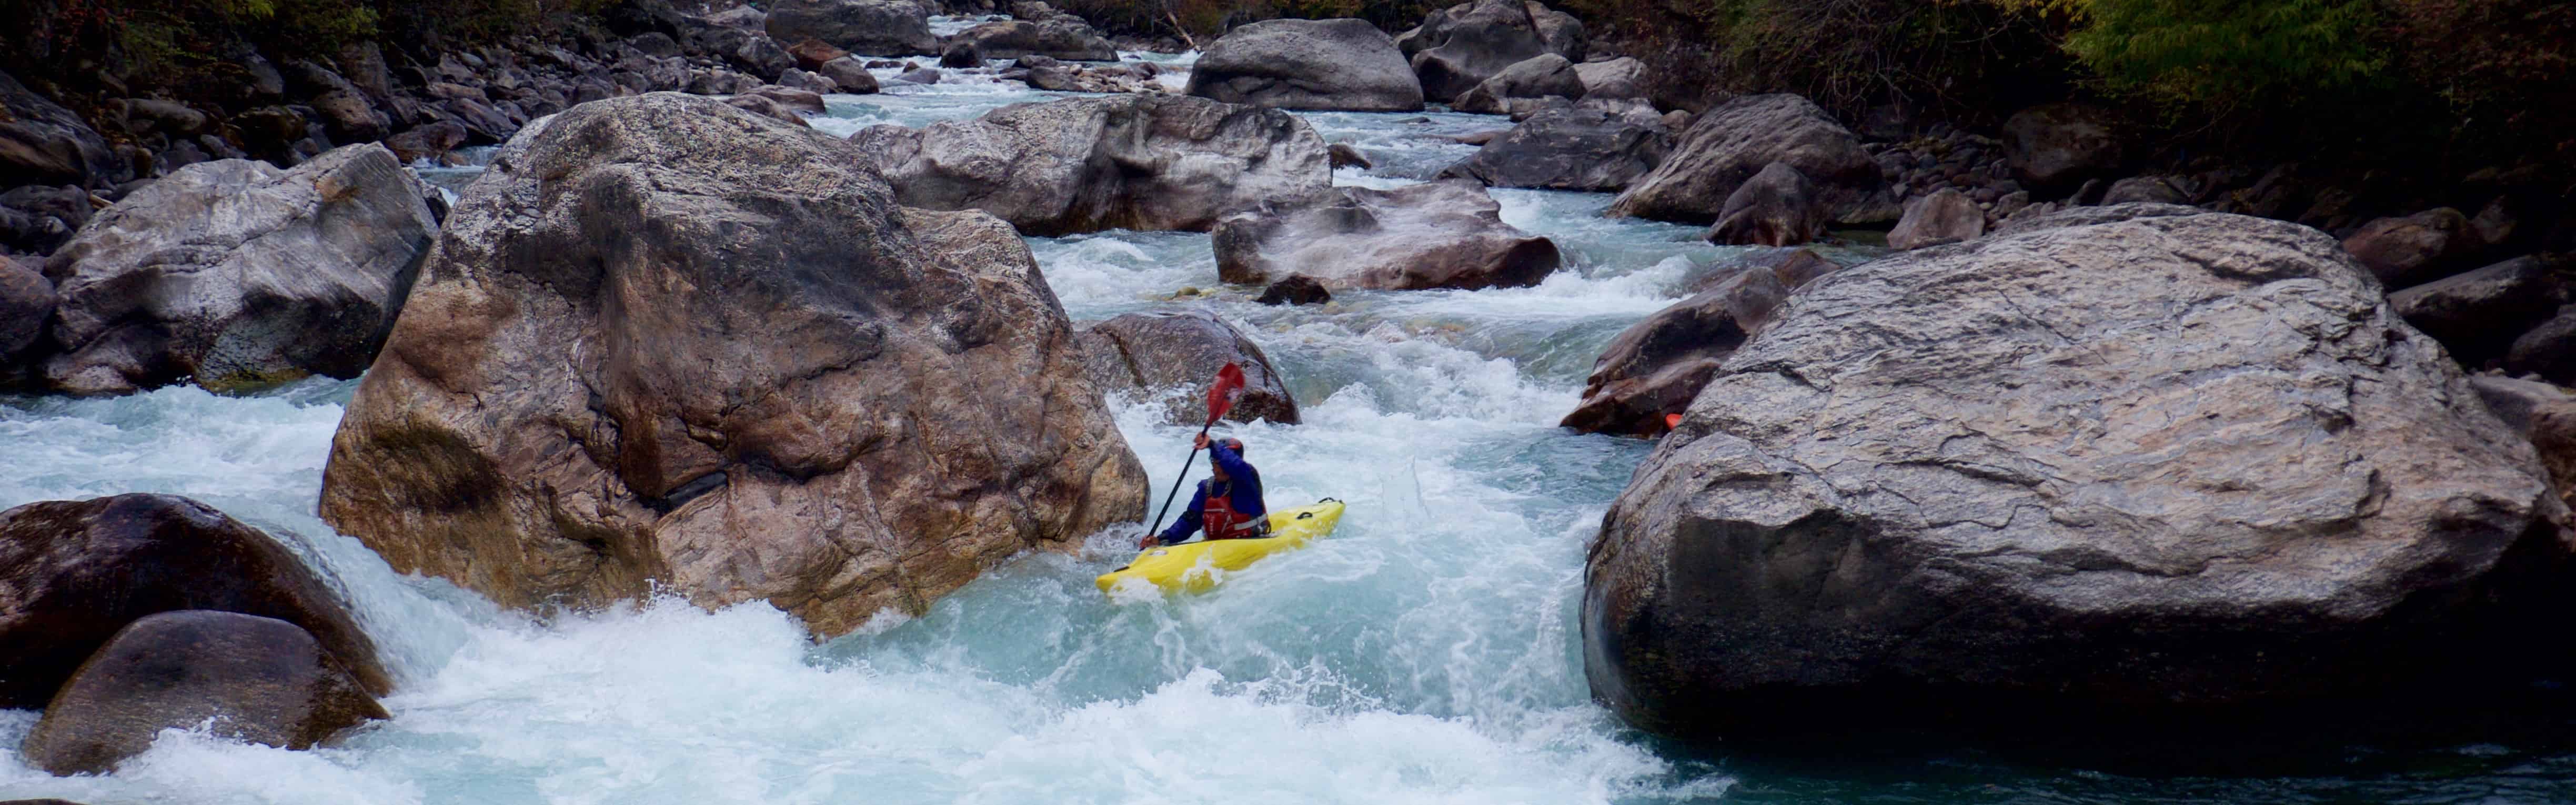 Entering one of the more difficult rapids on the first gorge